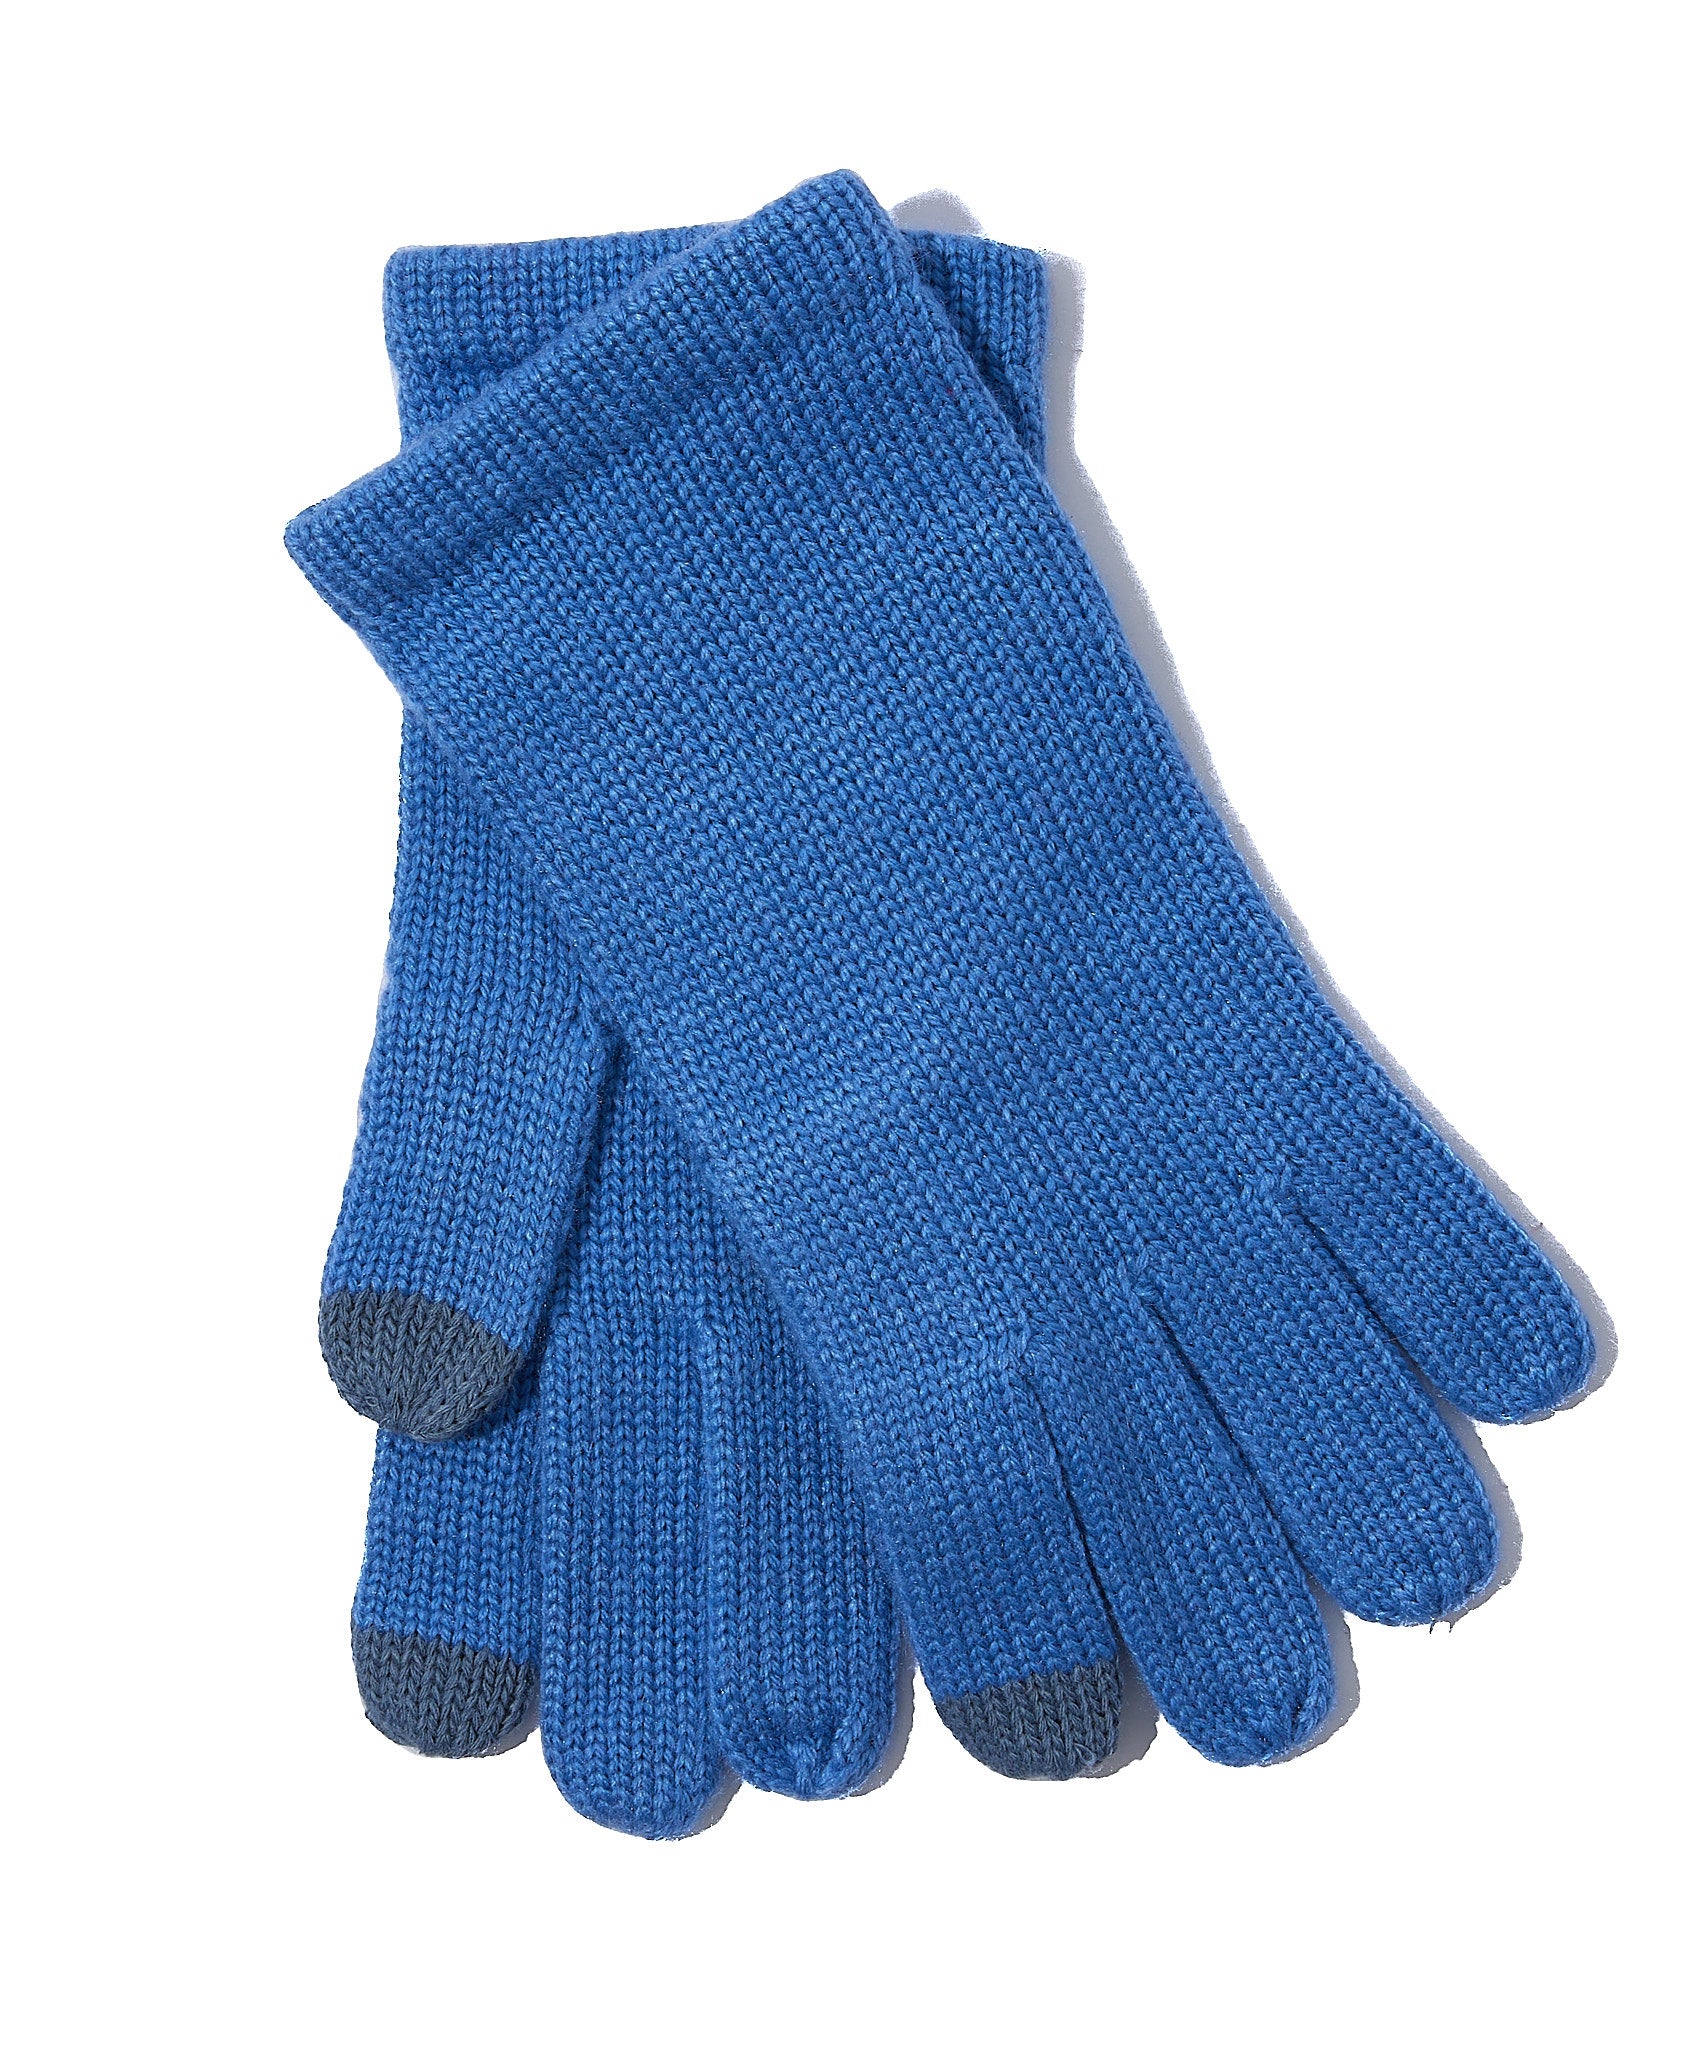 Recycled Polyester Blend Fingerless Gloves, Winter Accessories